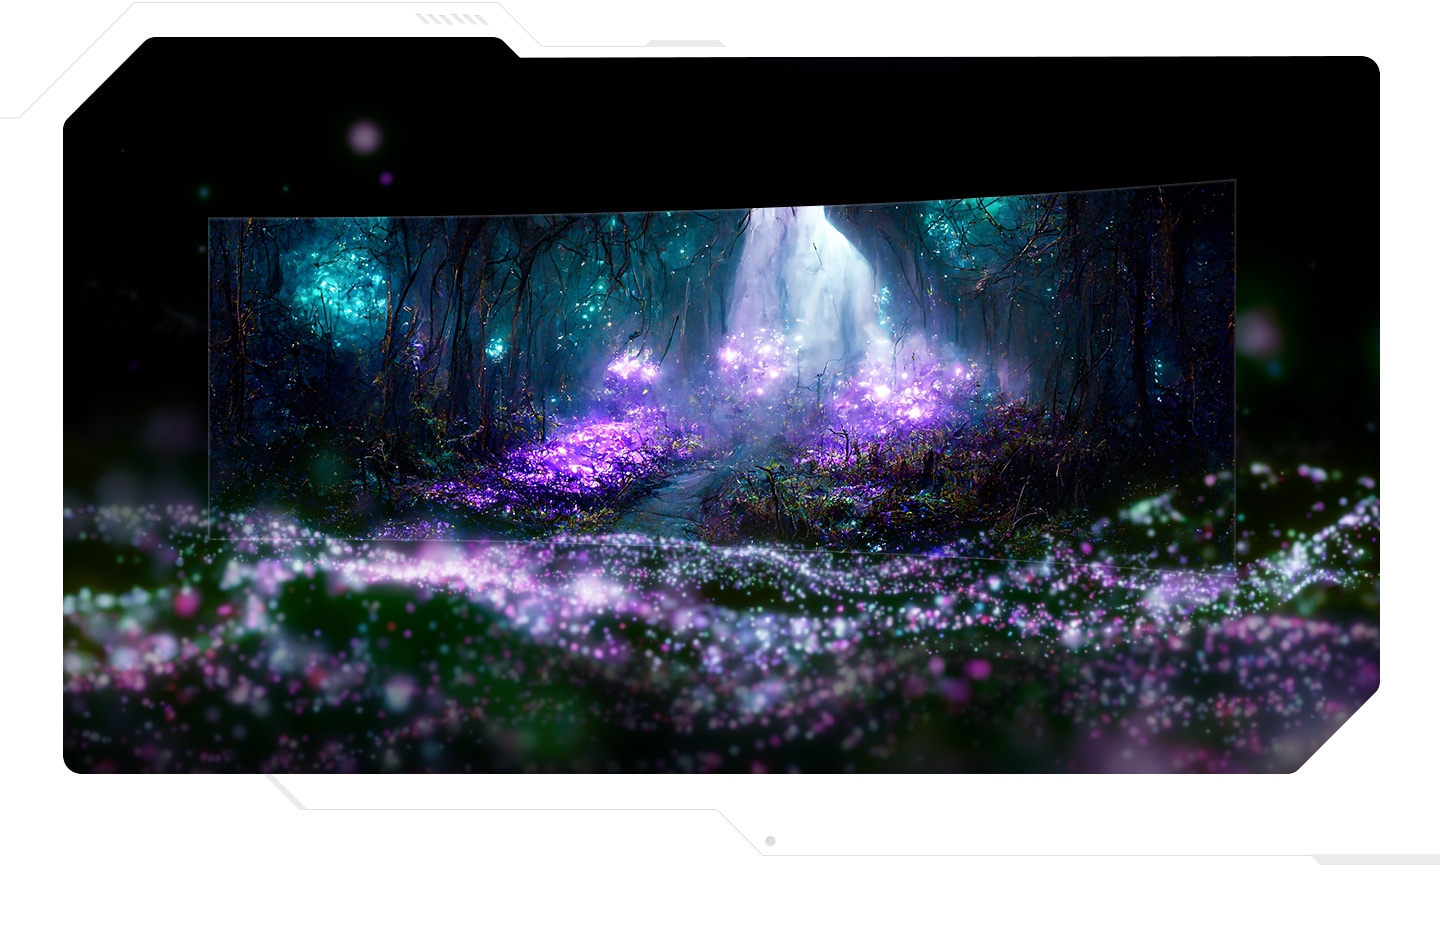 A curved monitor shows a forest with glowing flowers, with the flowers flowing out of the screen.